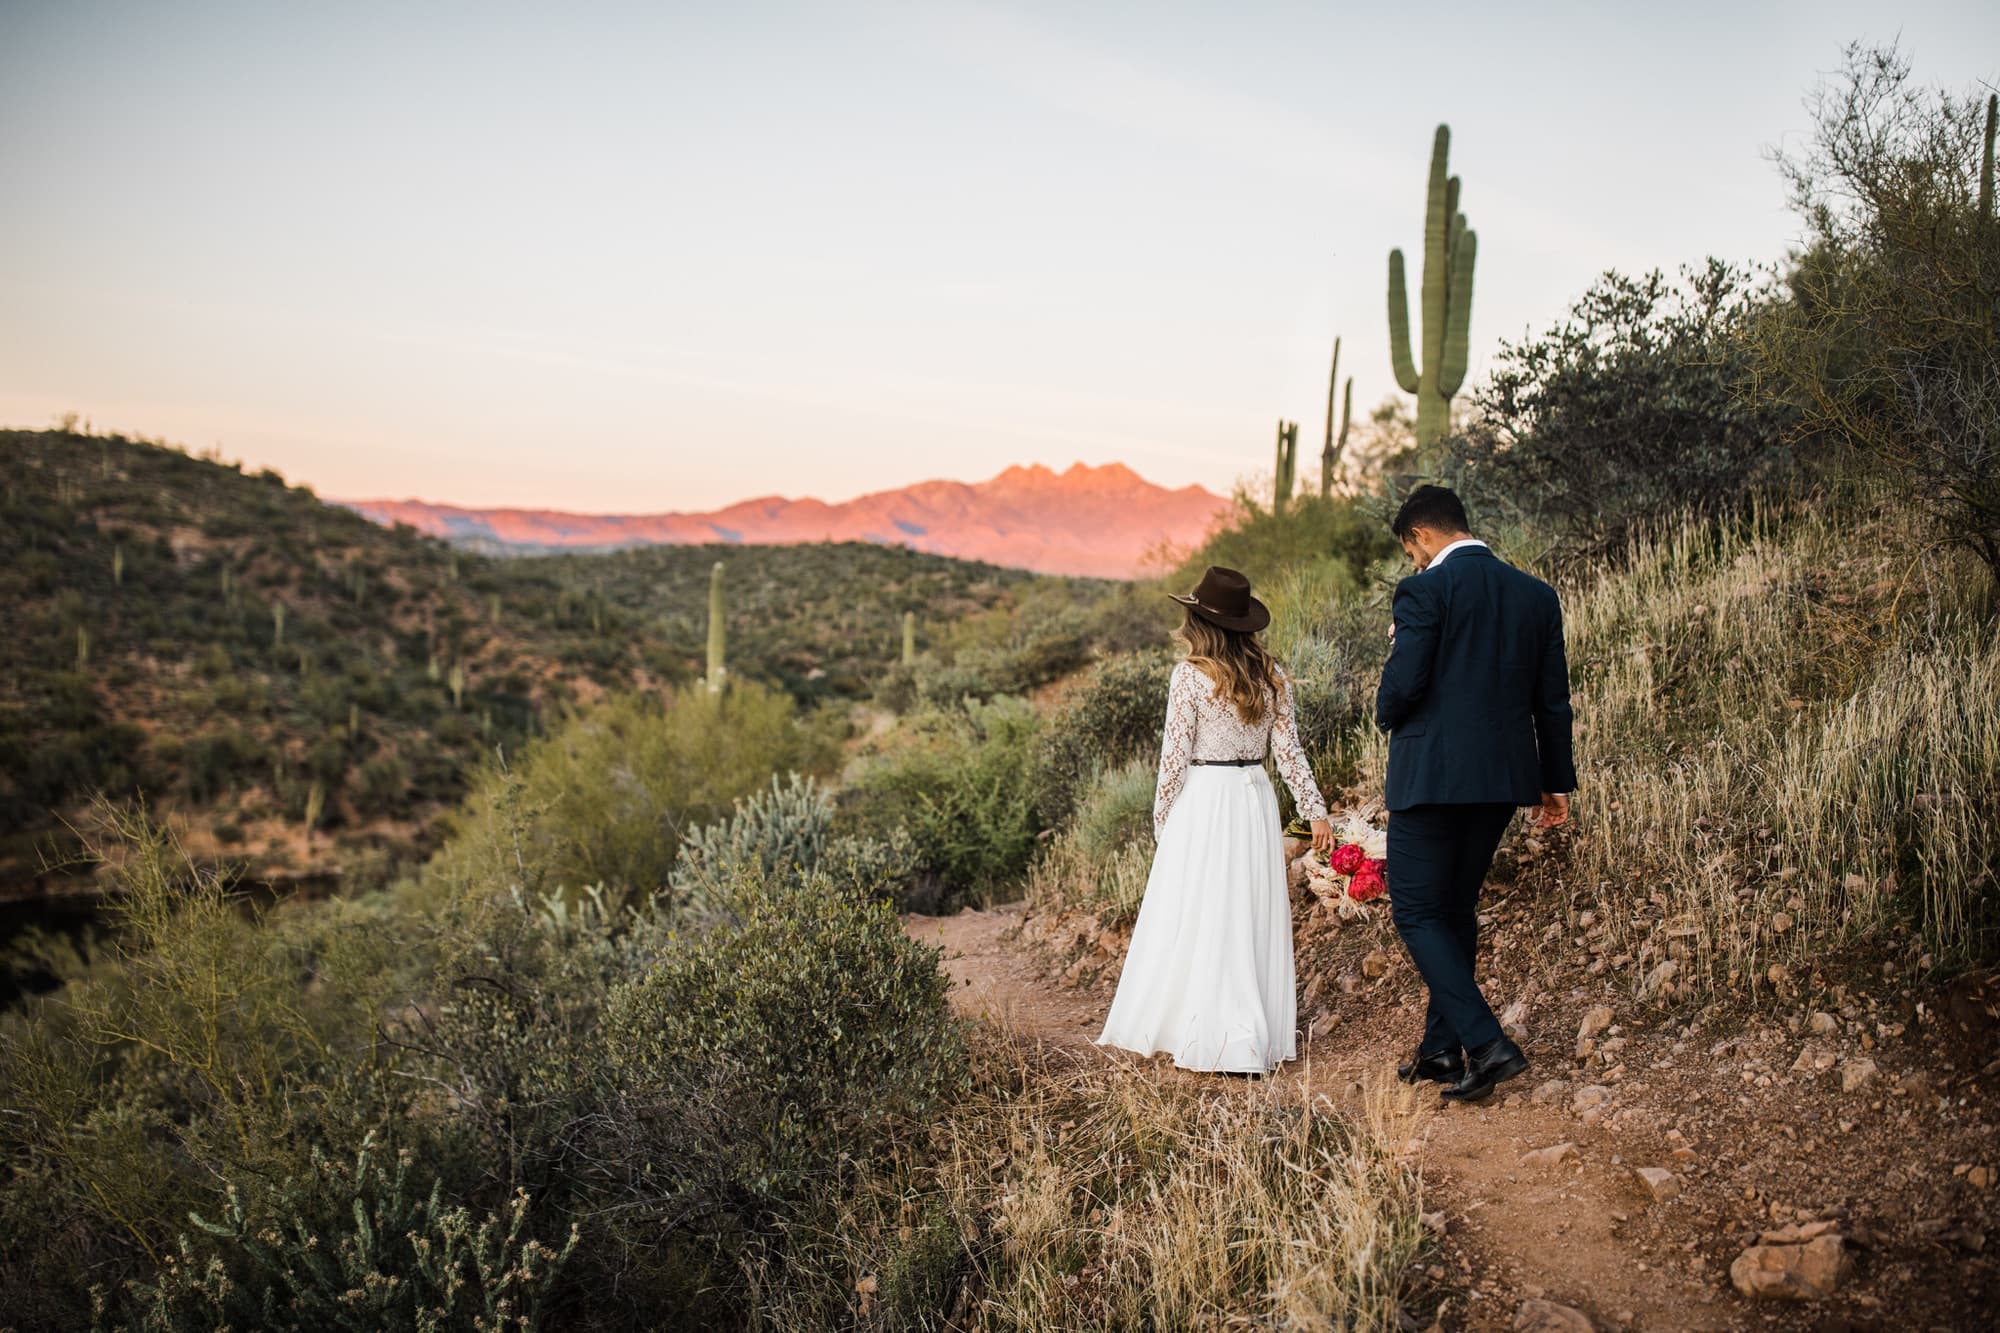 The couple elopes in Phoenix and walks in the desert at sunset.